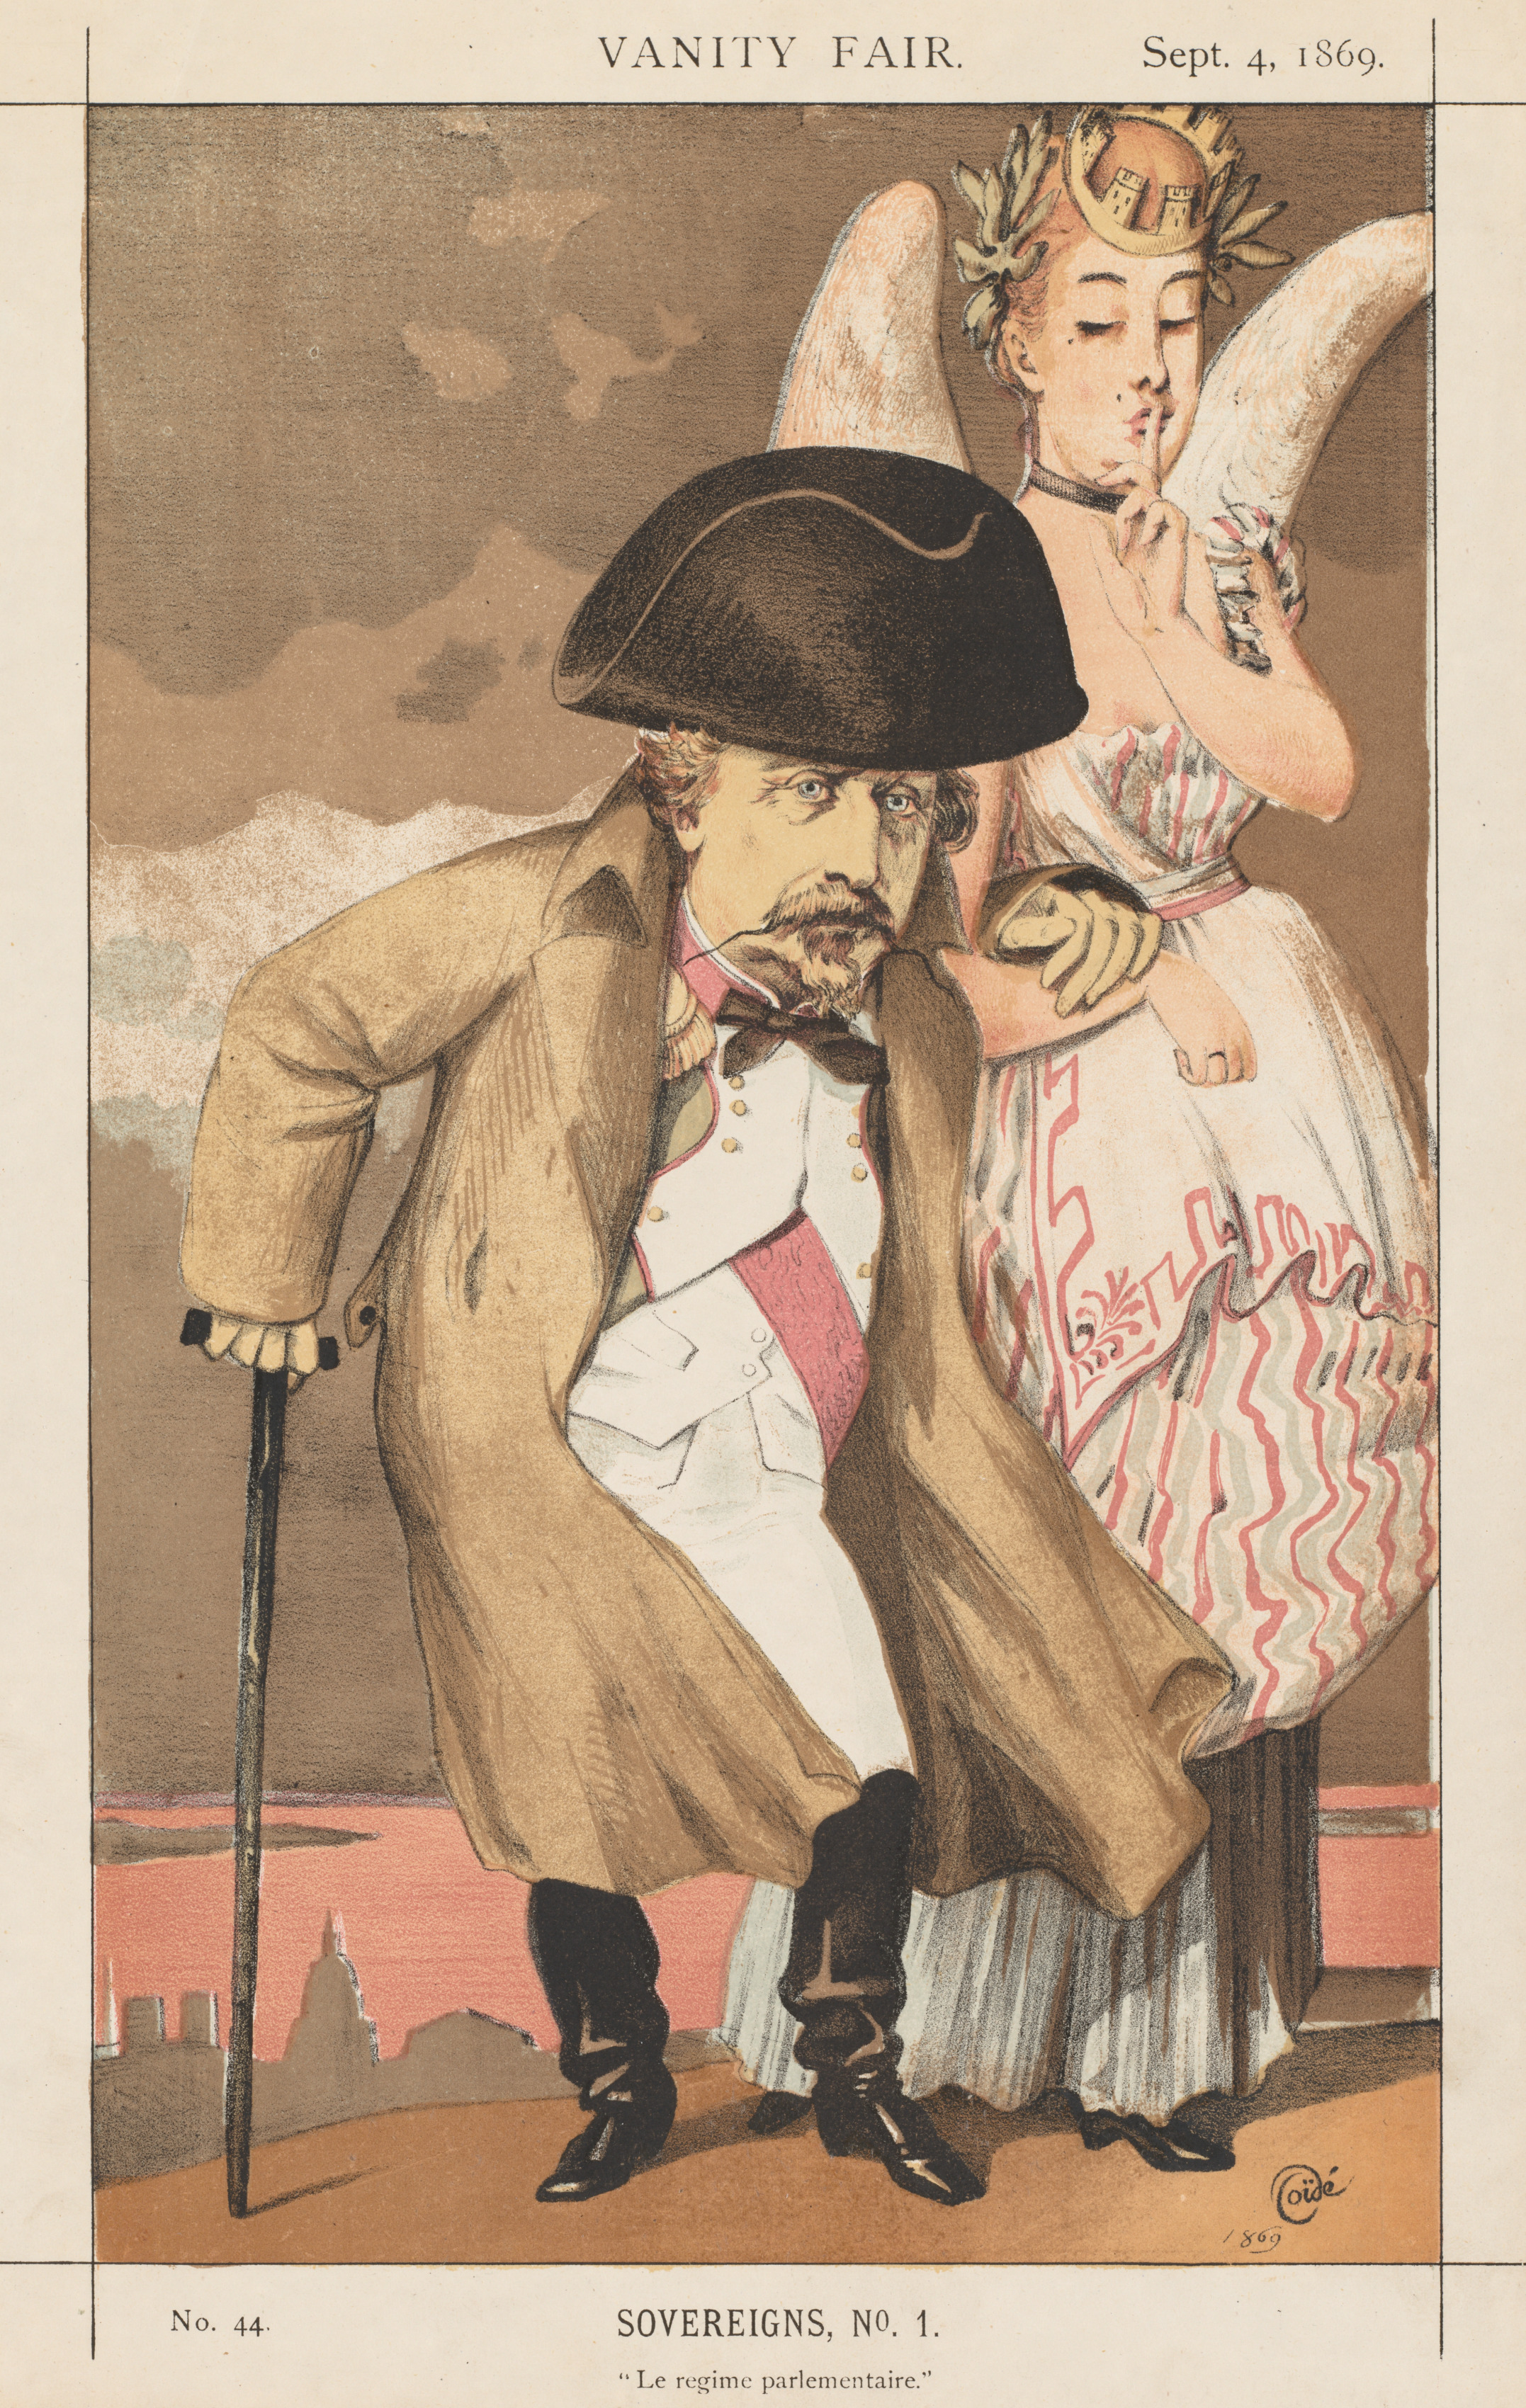 1869, VF cartoon, Napoleon III, by Tissot, 2014.254_print, Cleveland Museum, CC license, TIFF available